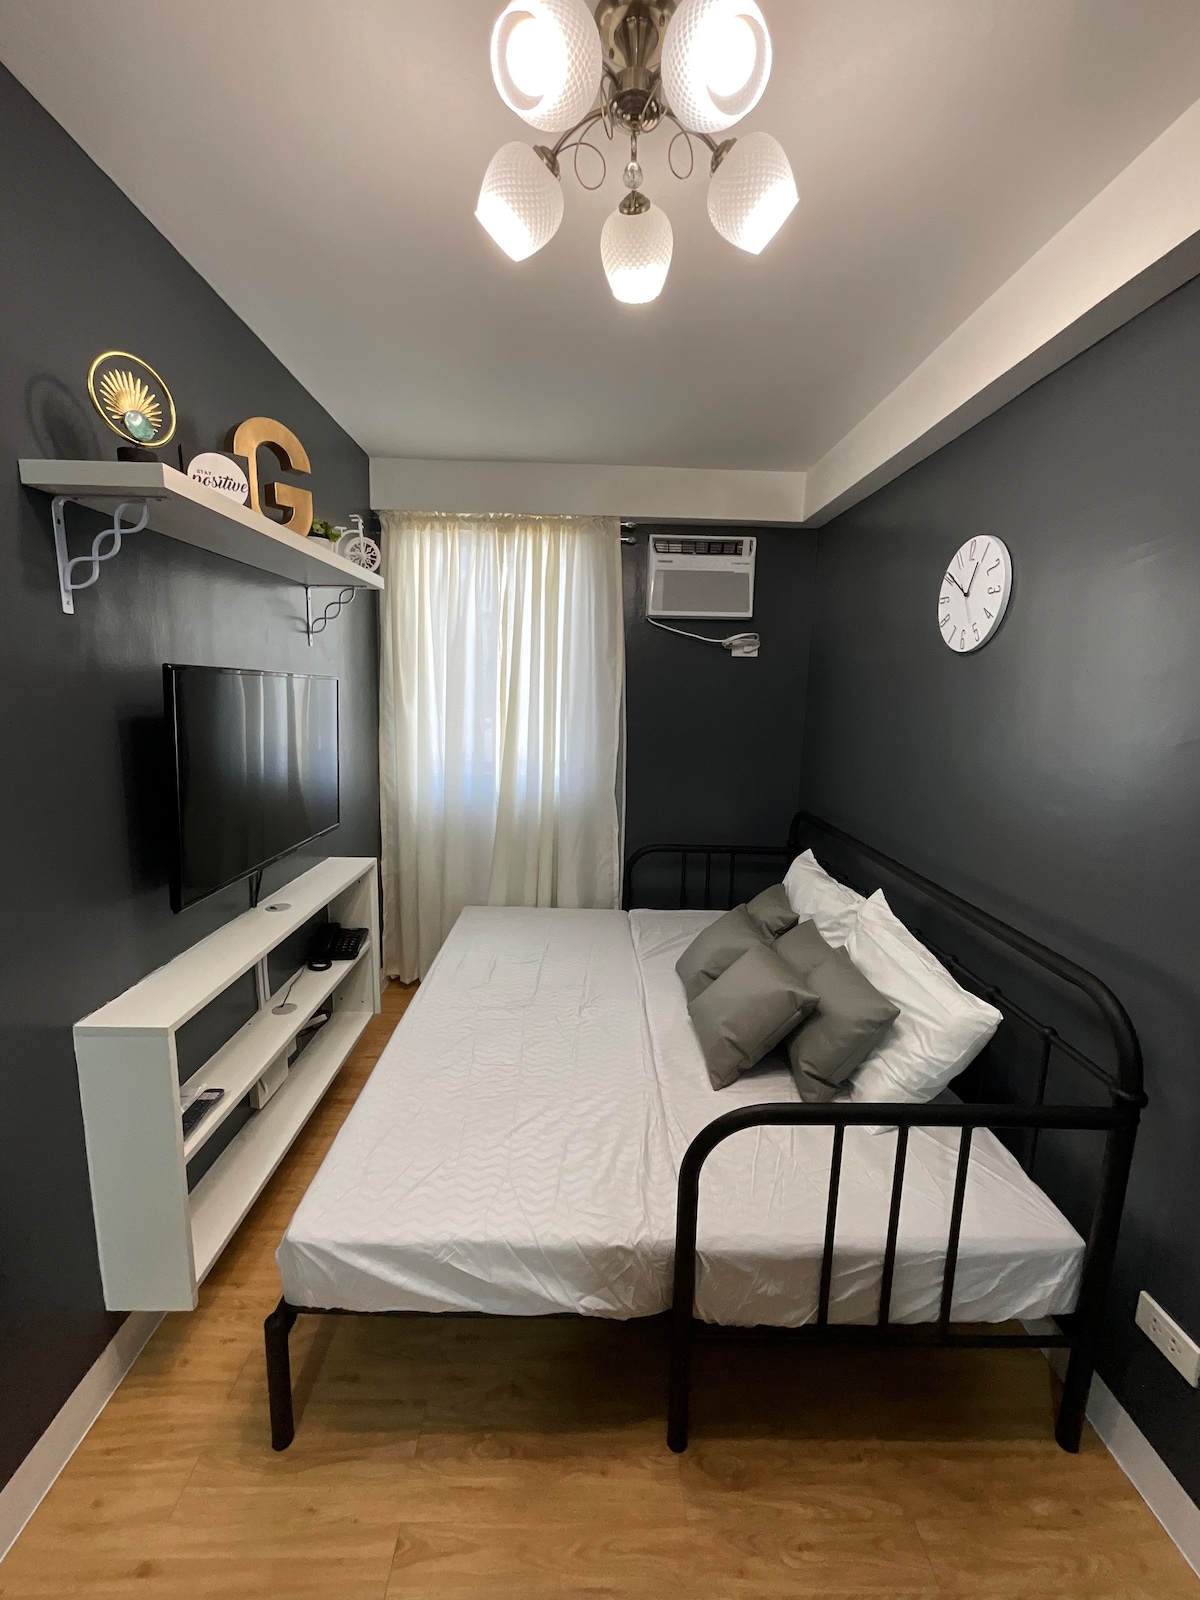 1 Br Condo comfortable and affordable stay for 5